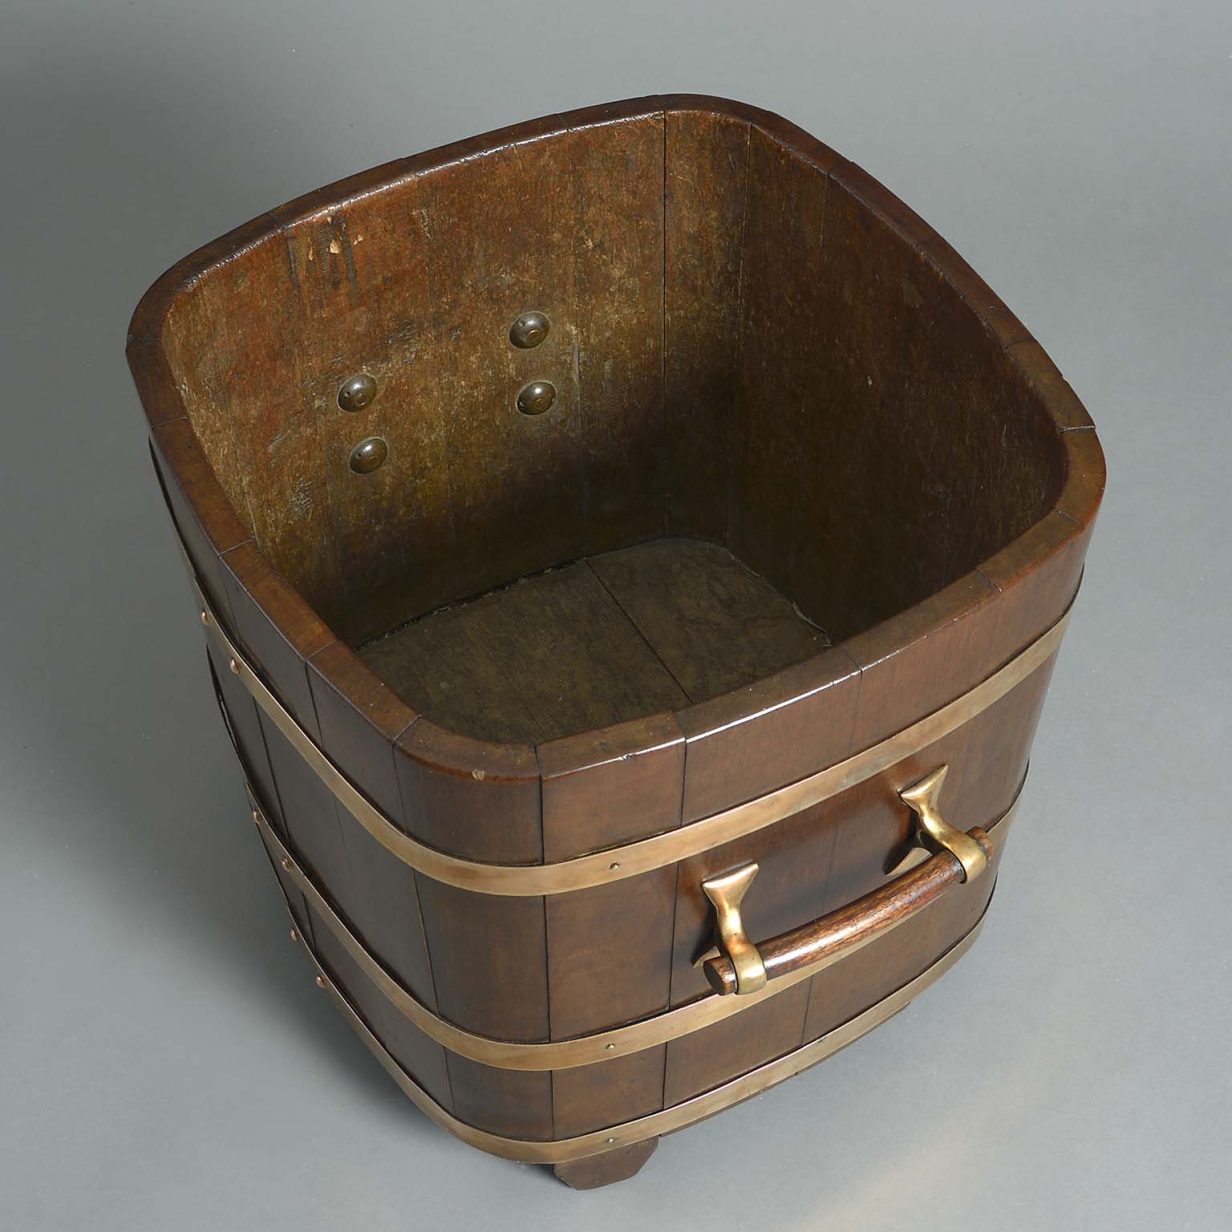 Early 20th century mahogany and copper log basket